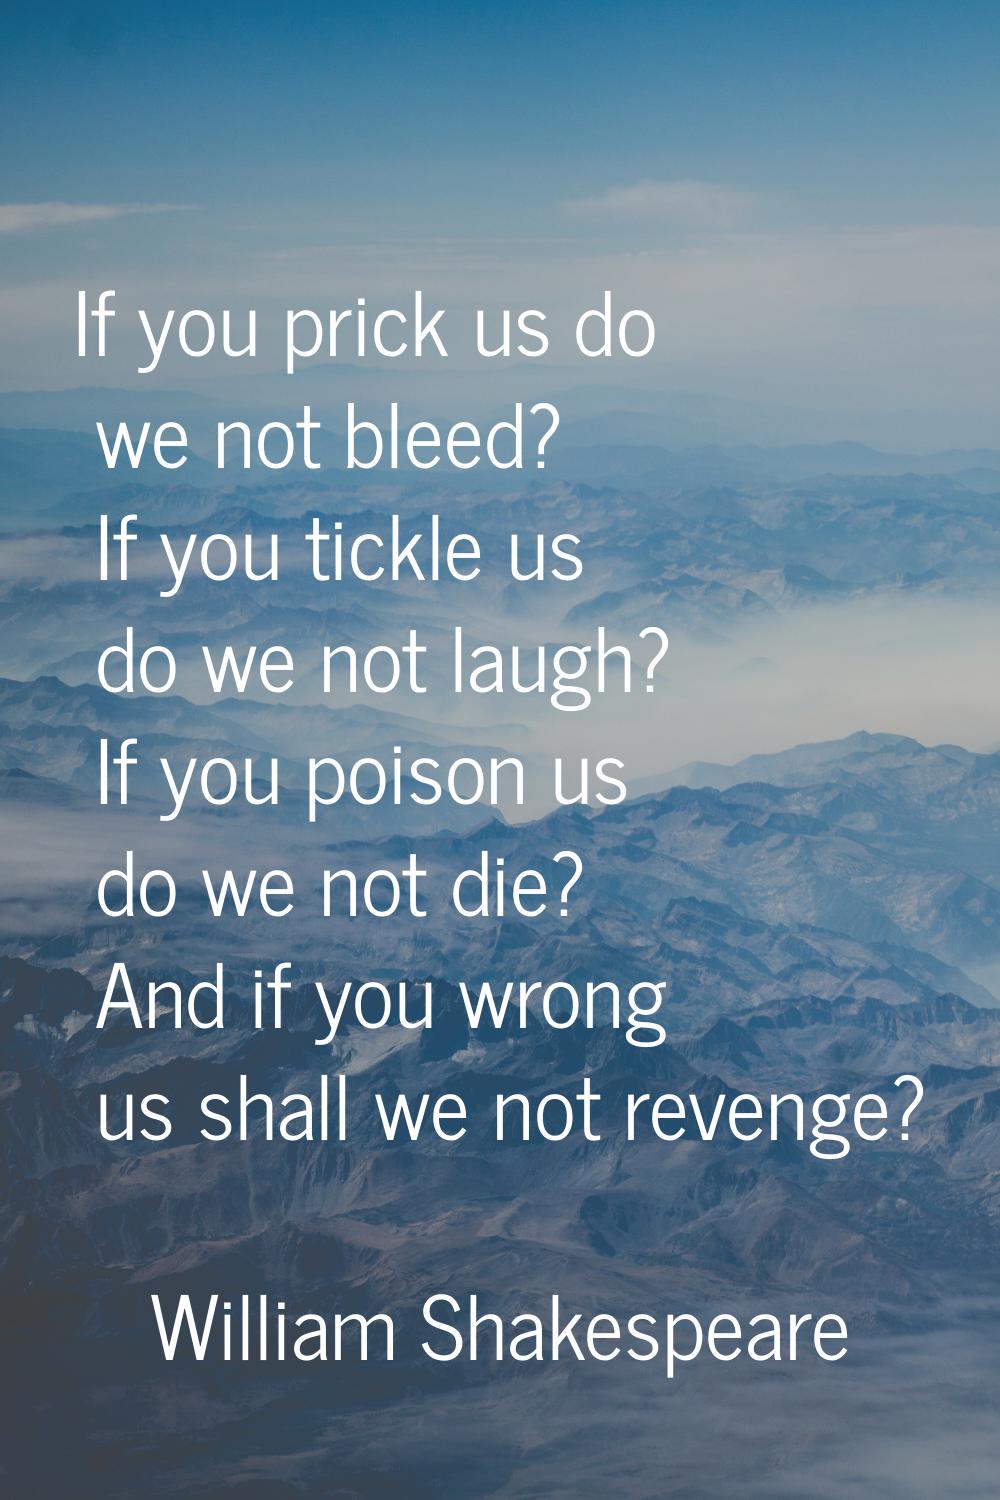 If you prick us do we not bleed? If you tickle us do we not laugh? If you poison us do we not die? 